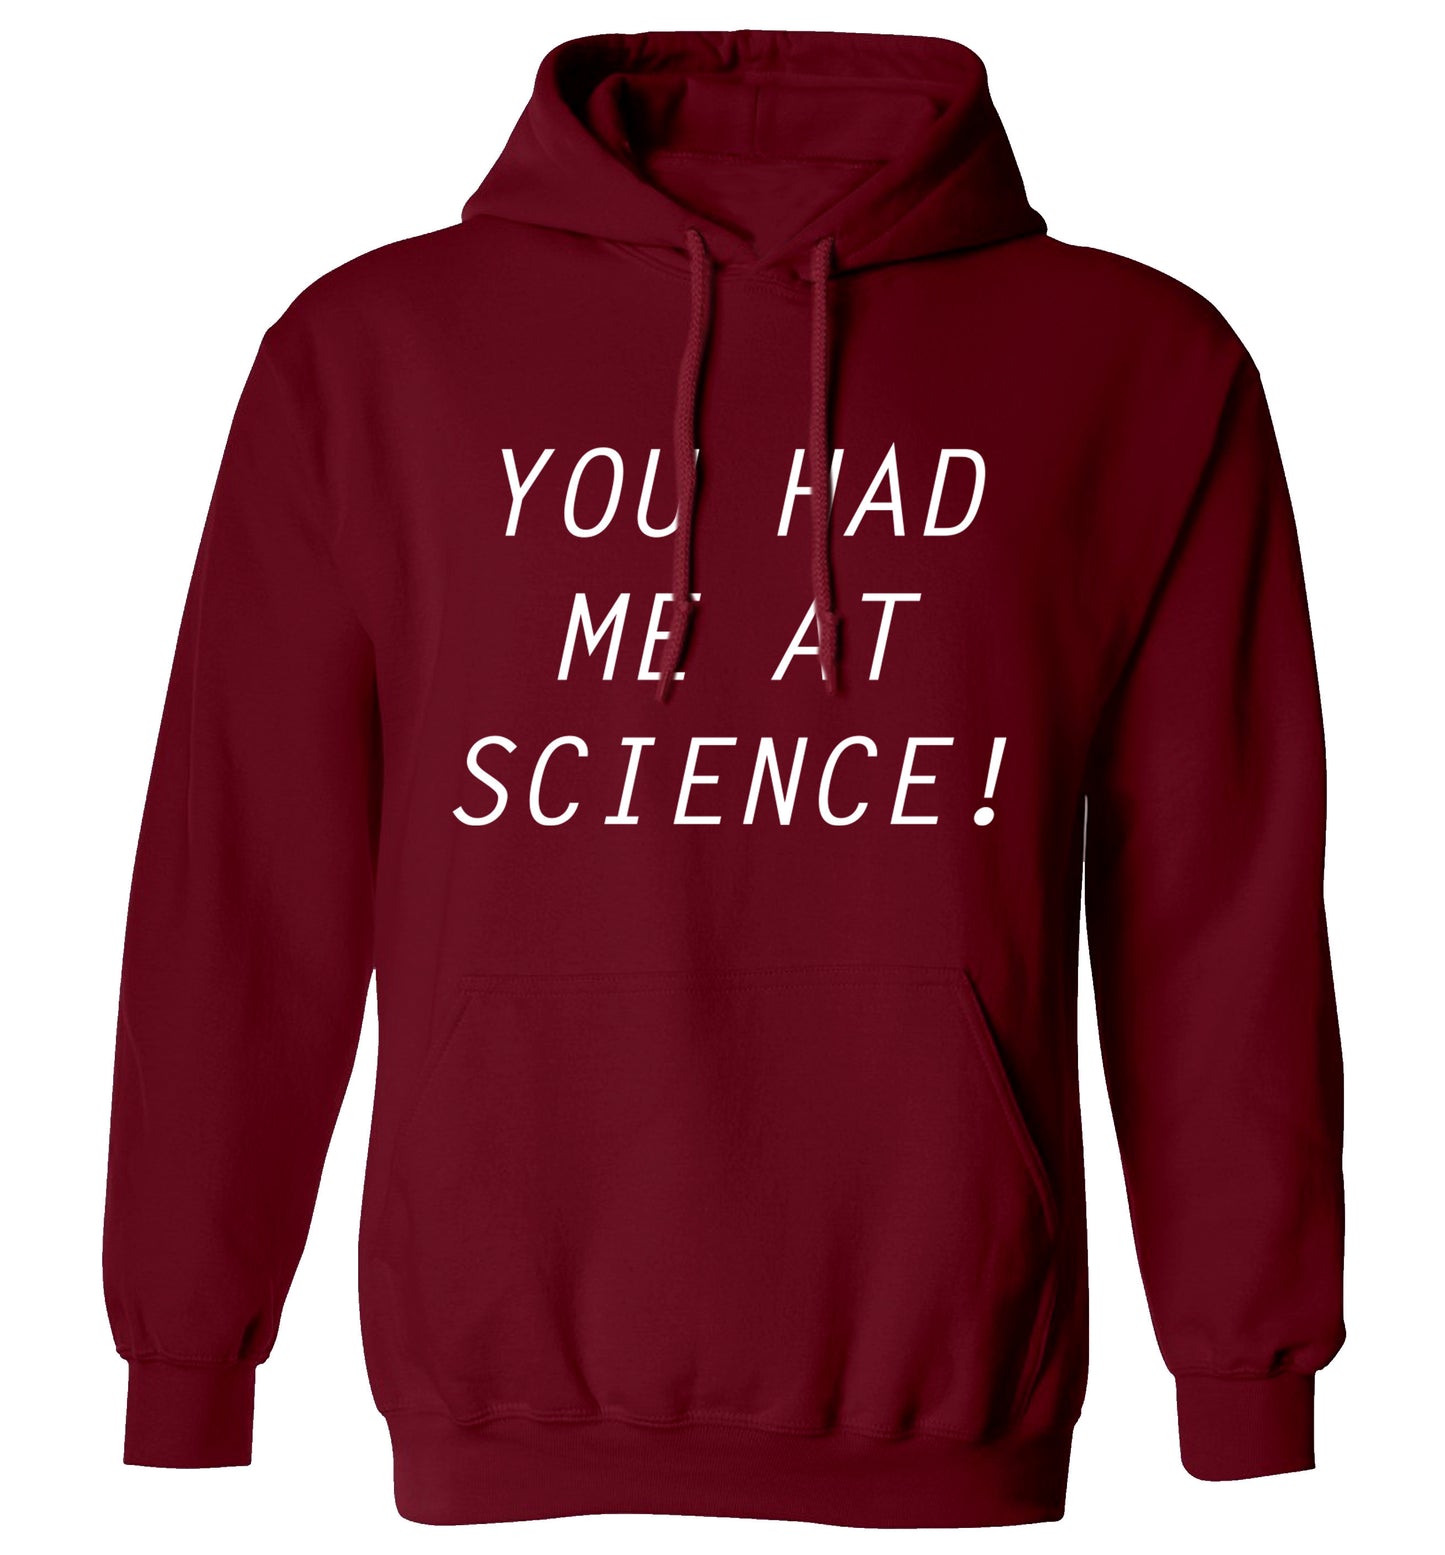 You had me at science adults unisex maroon hoodie 2XL